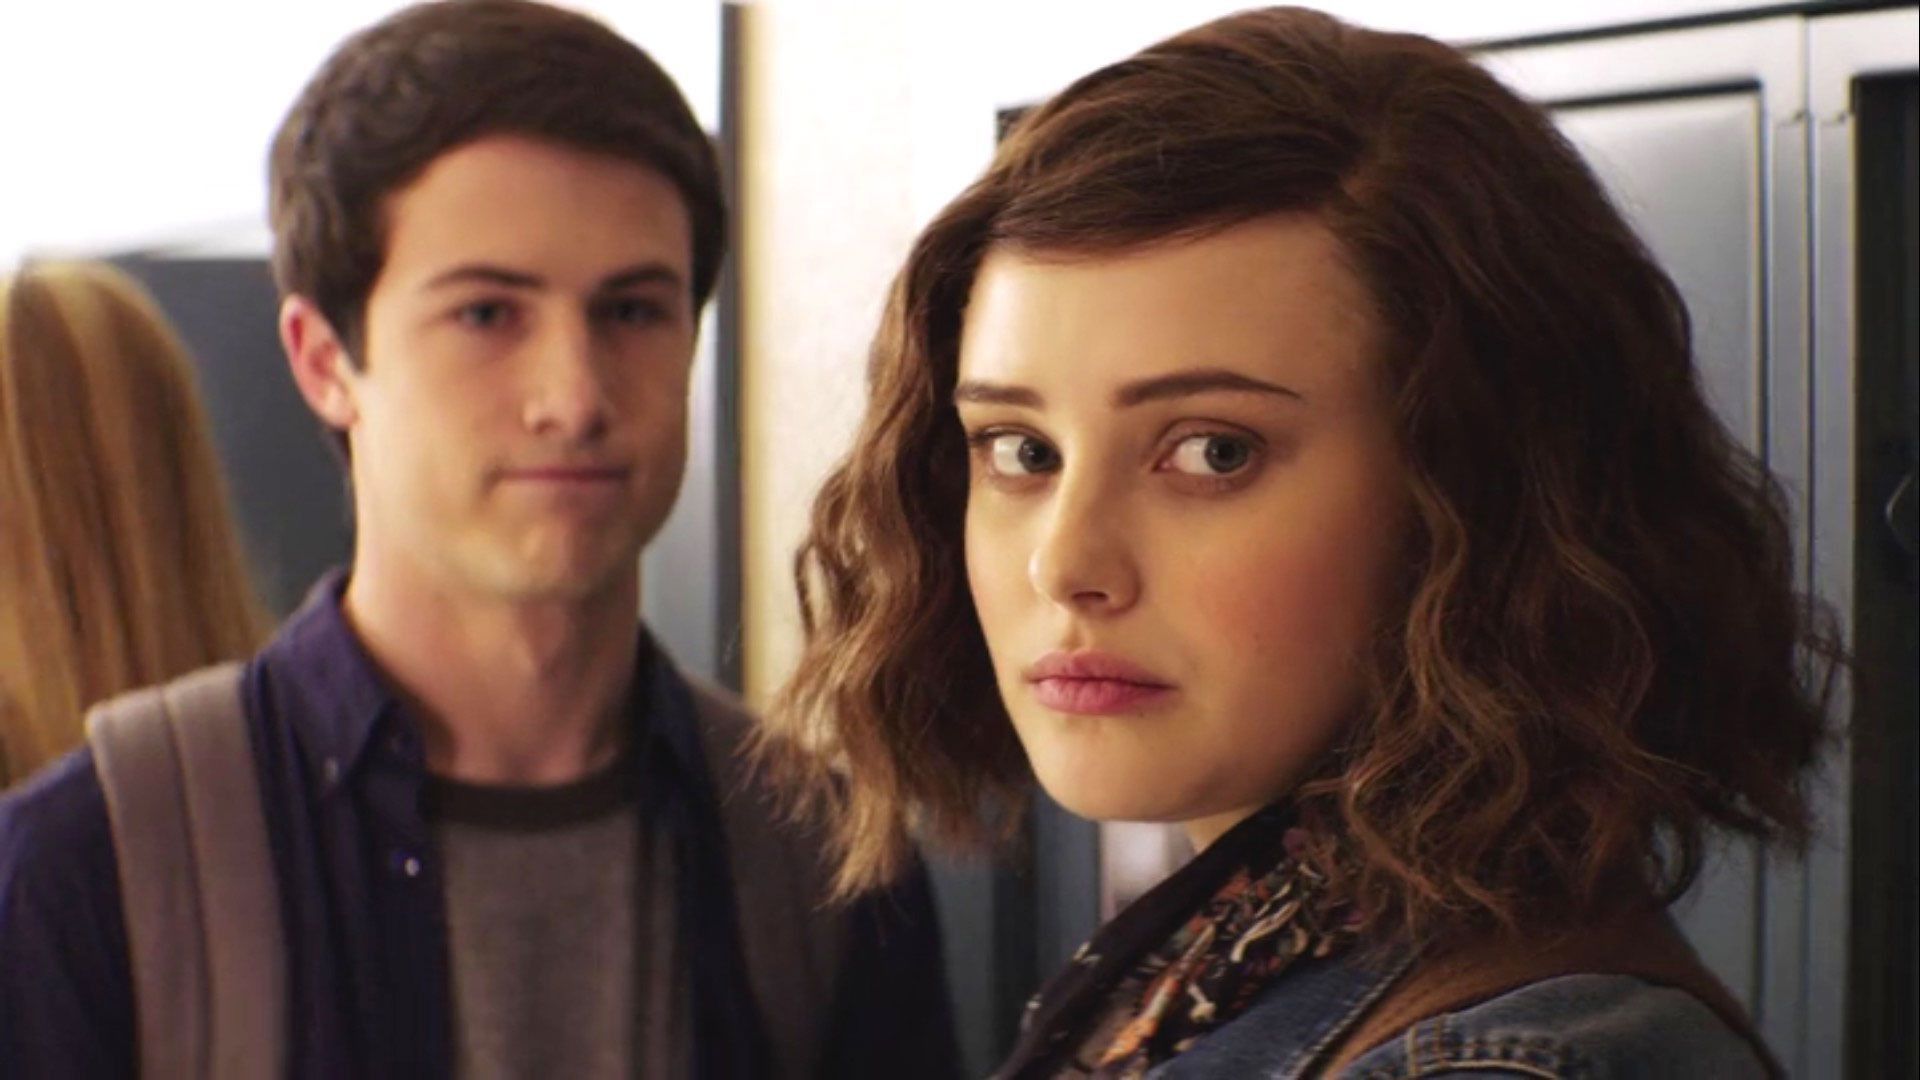 Netflix Has Edited '13 Reasons Why' to Remove Graphic Scene